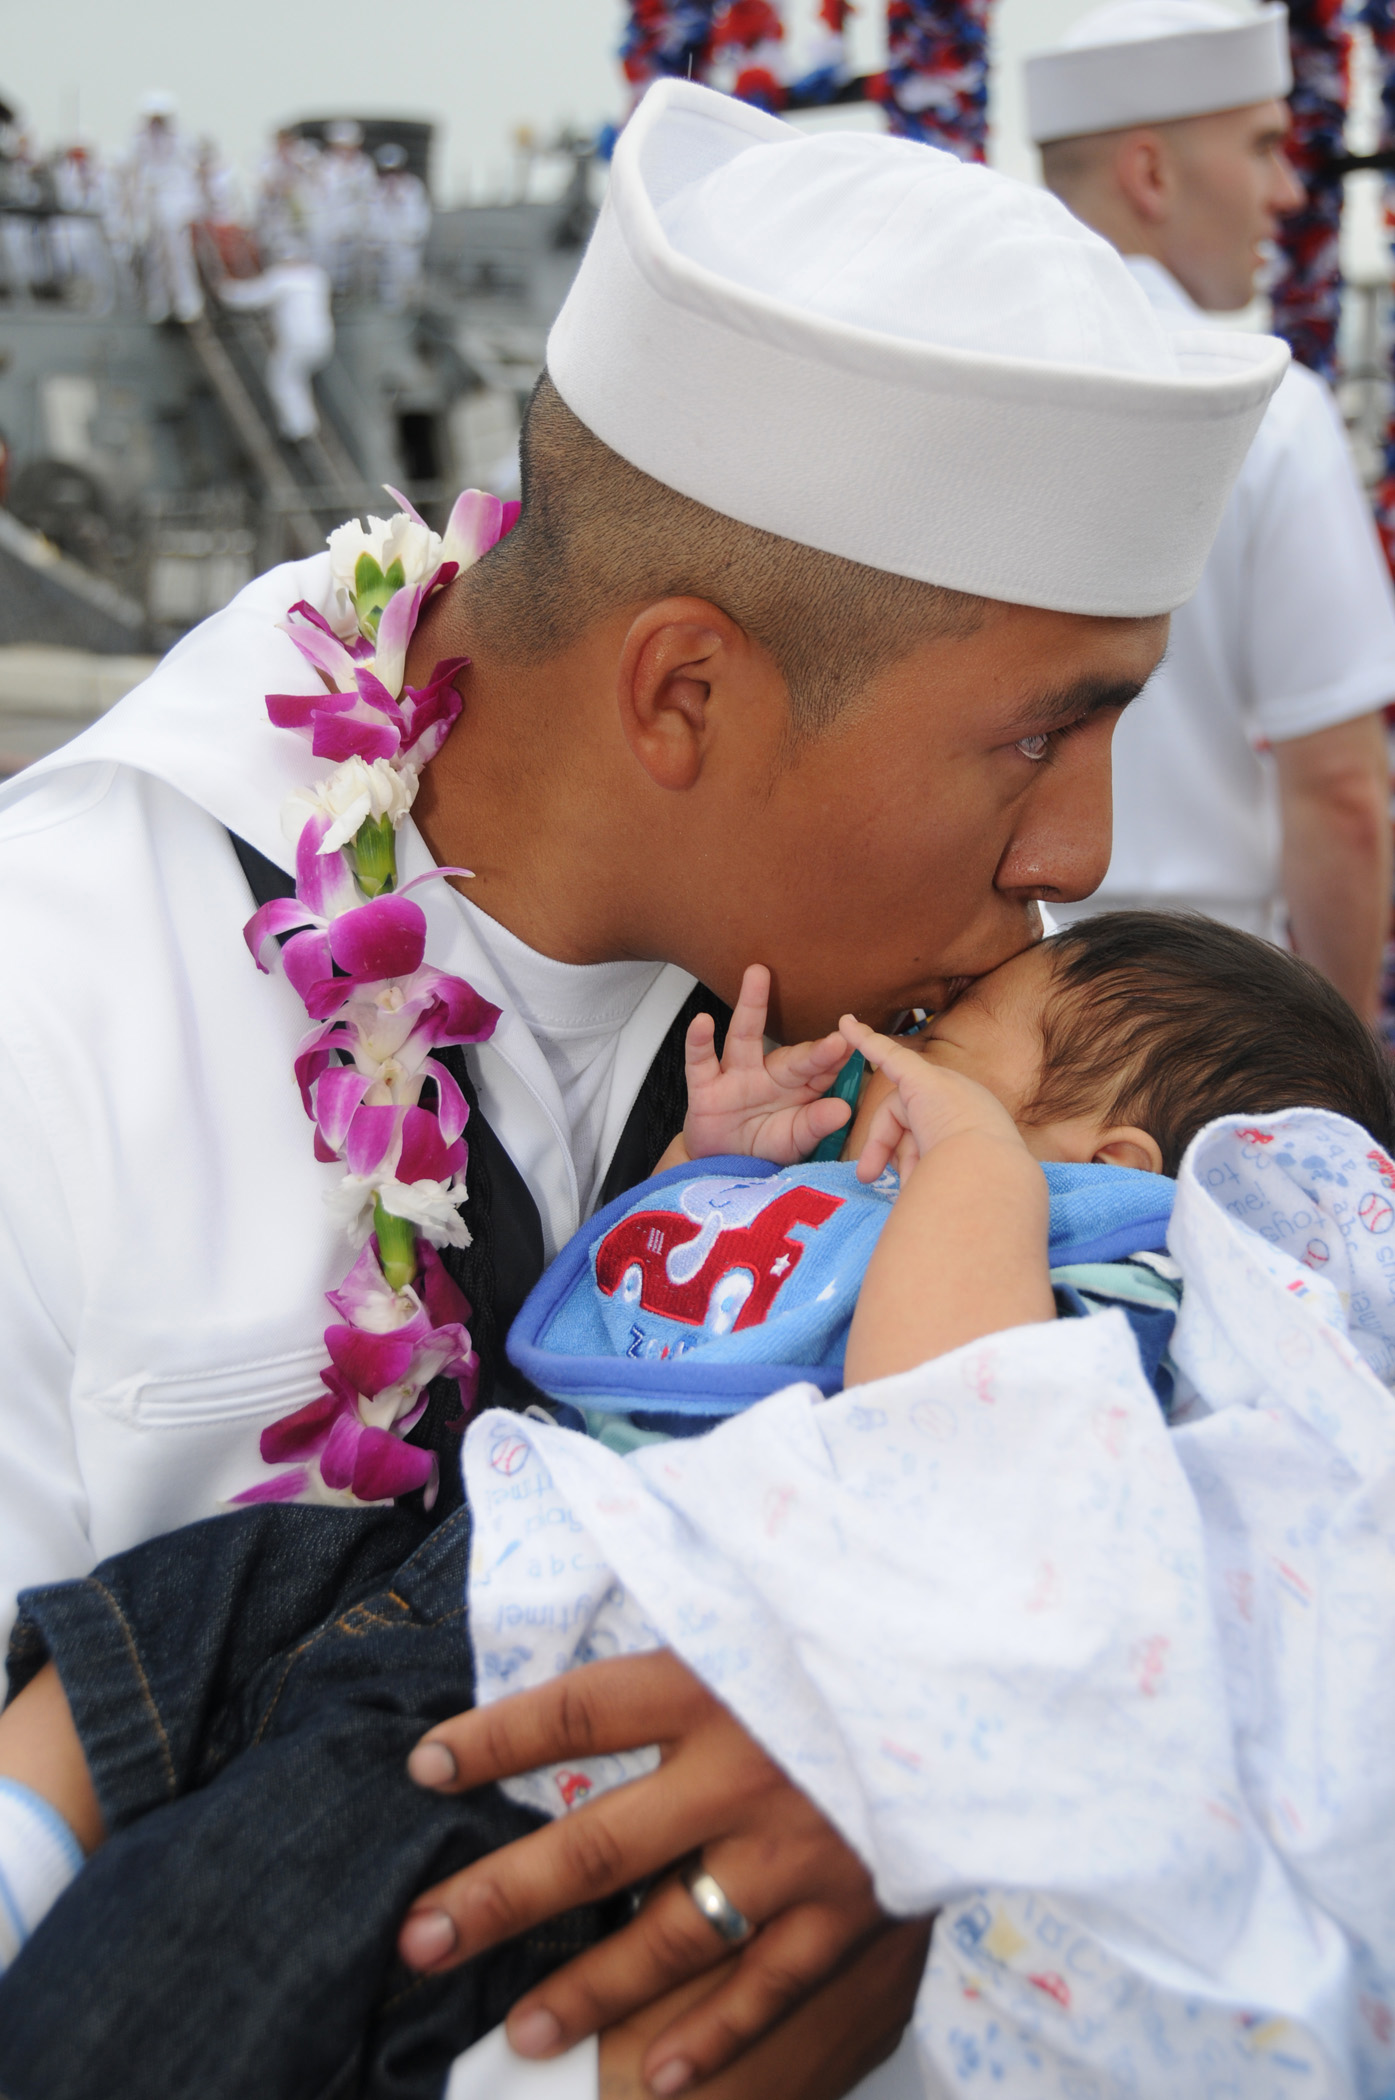 US Navy 090423-N-9758L-256 Boatswain's Mate 2nd Class Roberto Bonilla, assigned to the Arleigh Burke-class guided-missile destroyer USS Hopper (DDG 70), kisses his newborn son after returning from a three-month deployment